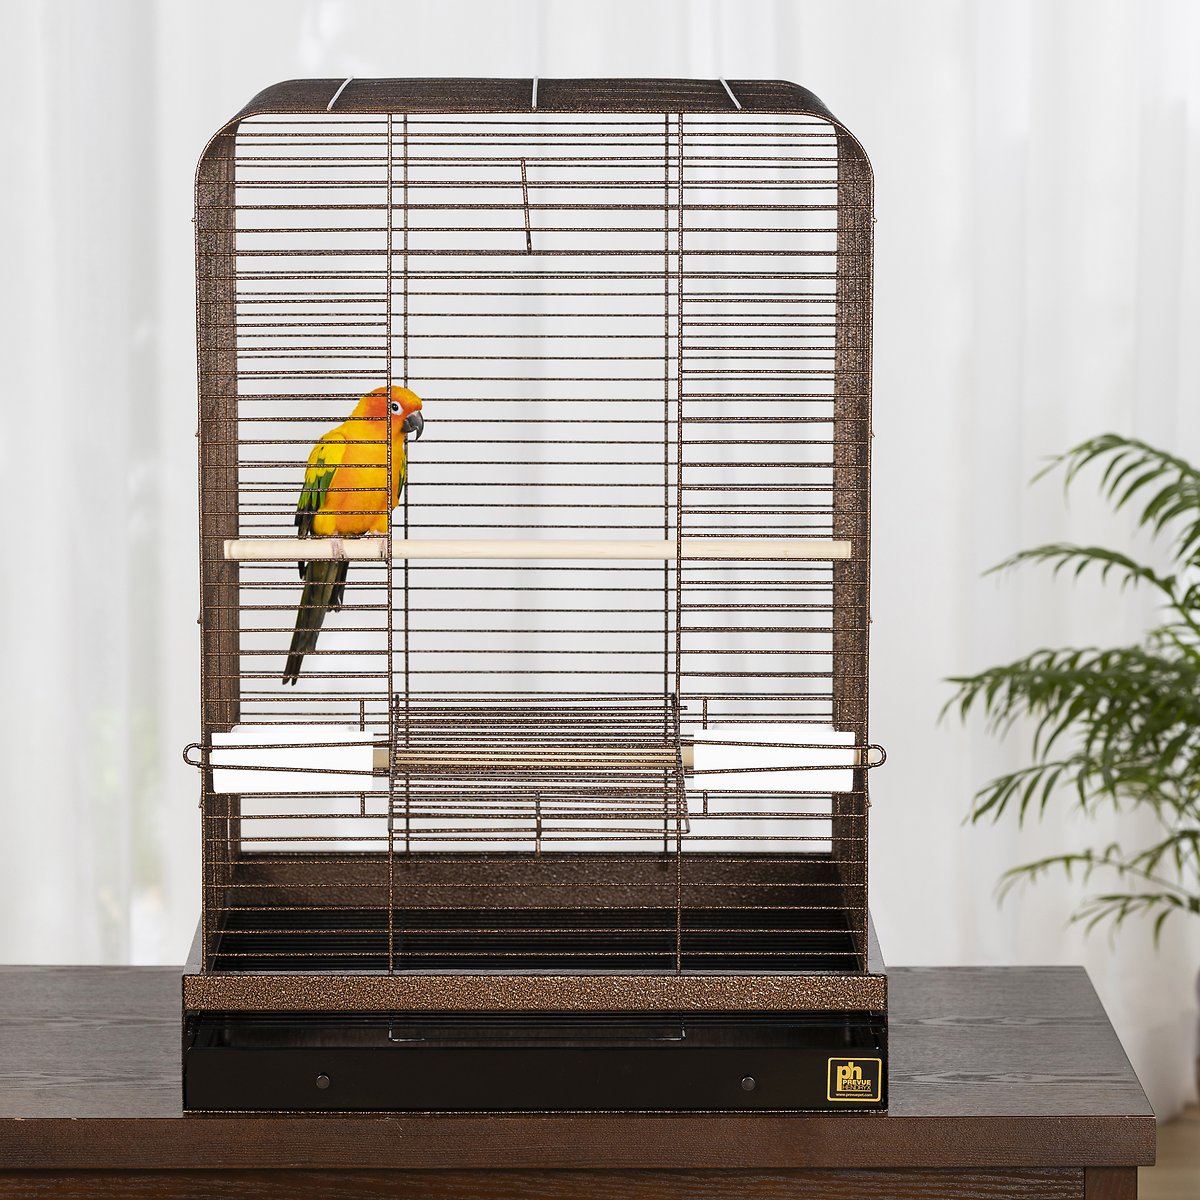 Canine's World Bird Cage Prevue Pet Products Keet / Tiel Bird Cage, Copper Prevue Pet Products